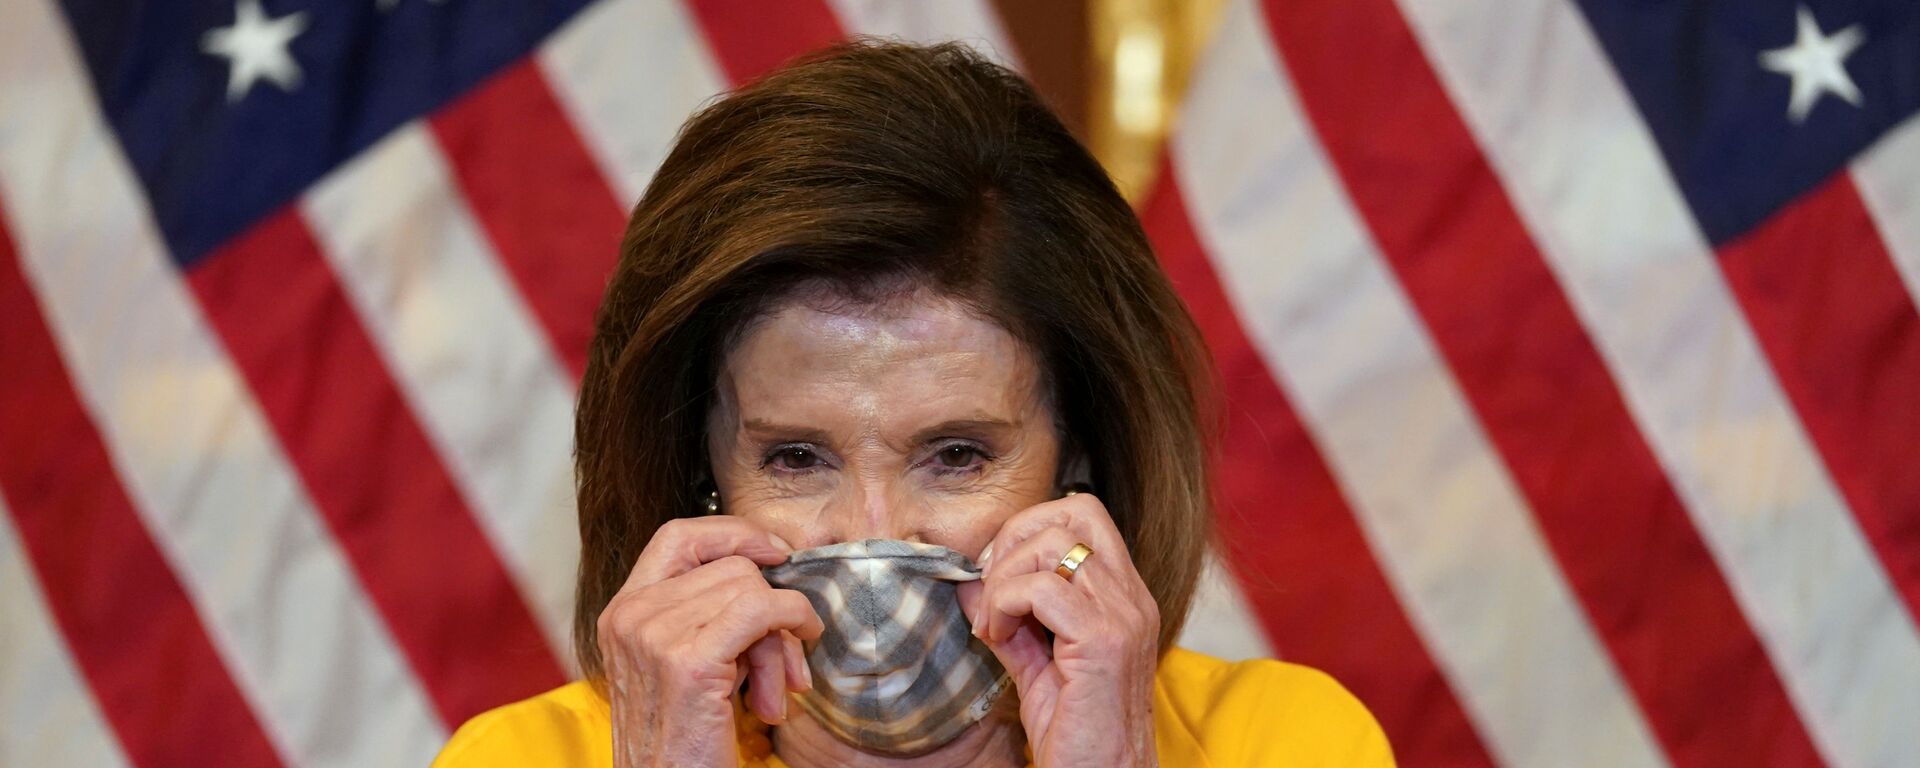 Speaker of the House Nancy Pelosi puts on her face mask to protect from the coronavirus disease (COVID-19) after taking part in a ceremonial swearing-in for Rep. Mike Garcia (R-CA) in Washington, U.S., May 19, 2020 - Sputnik International, 1920, 20.05.2020